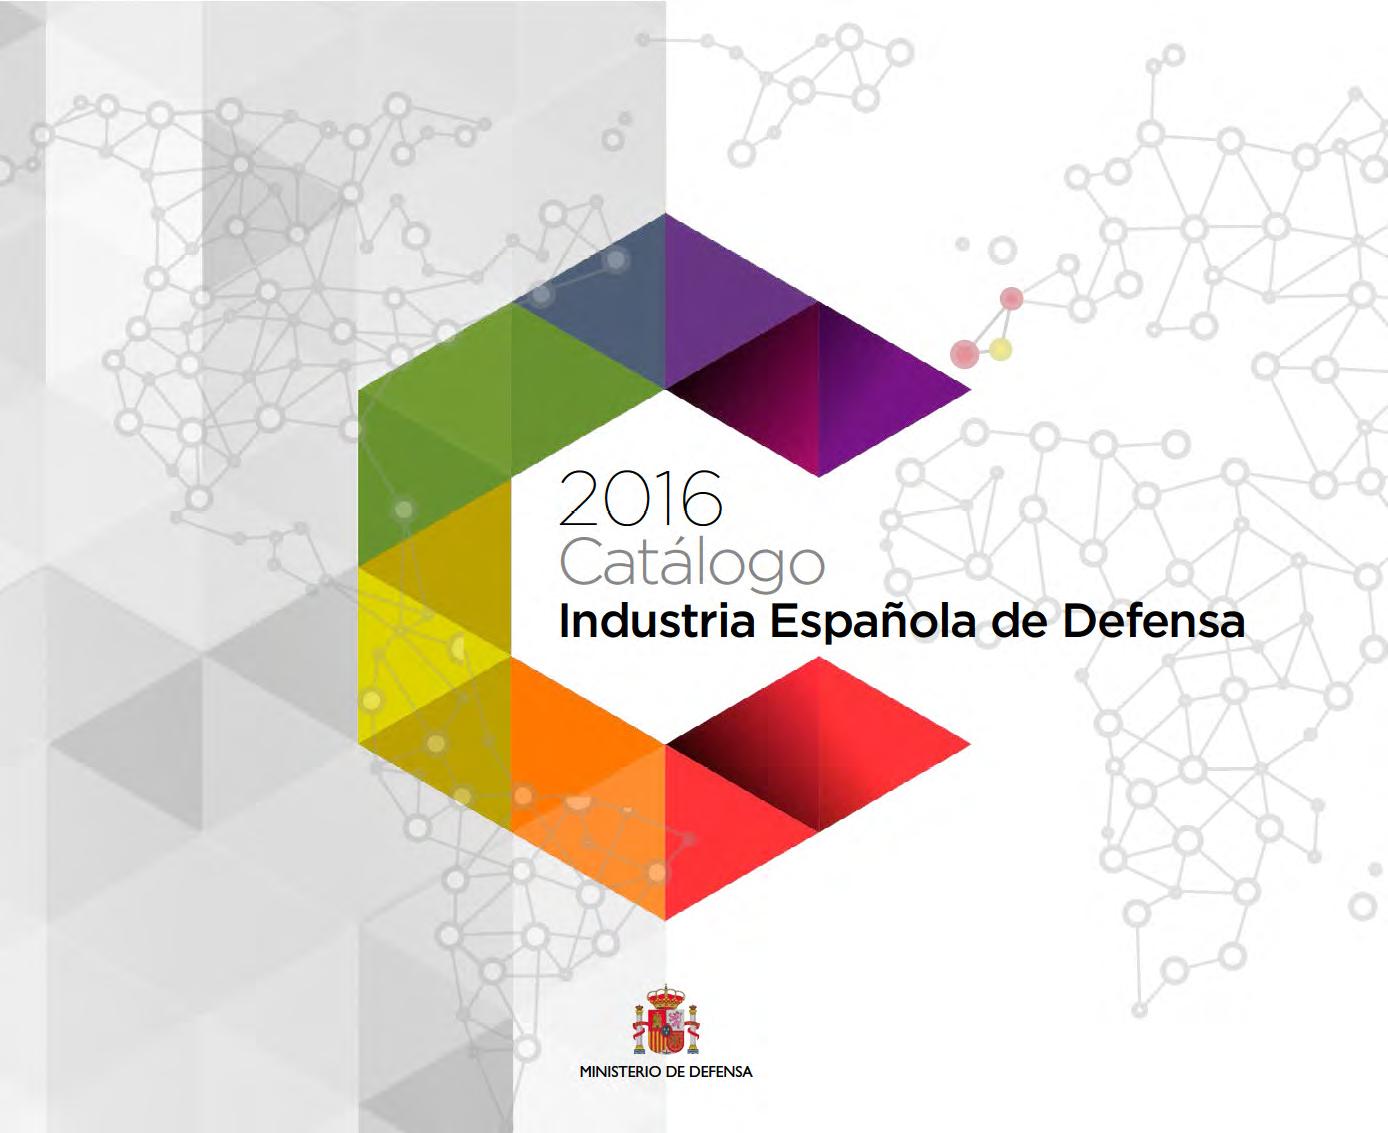 CATALOGUE OF SPANISH DEFENSE INDUSTRY 2016